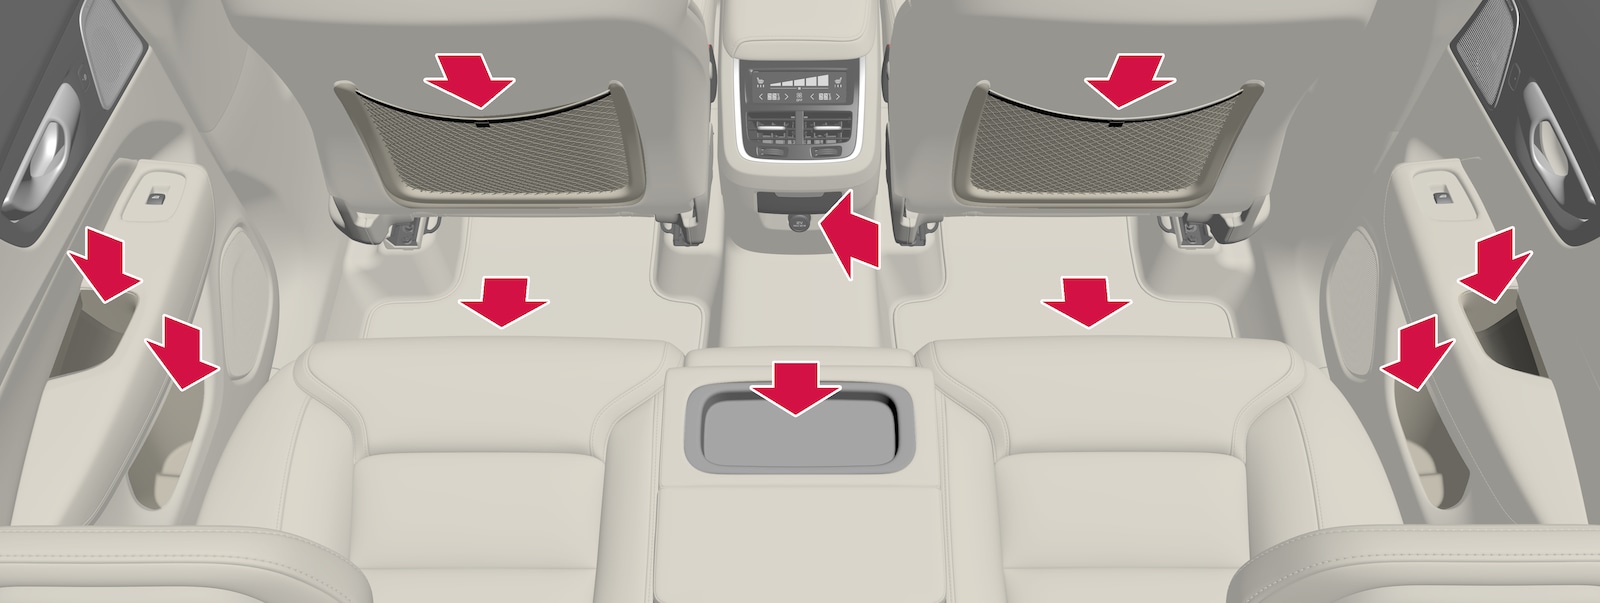 P5- XC60-1717-Overview interior rear seat